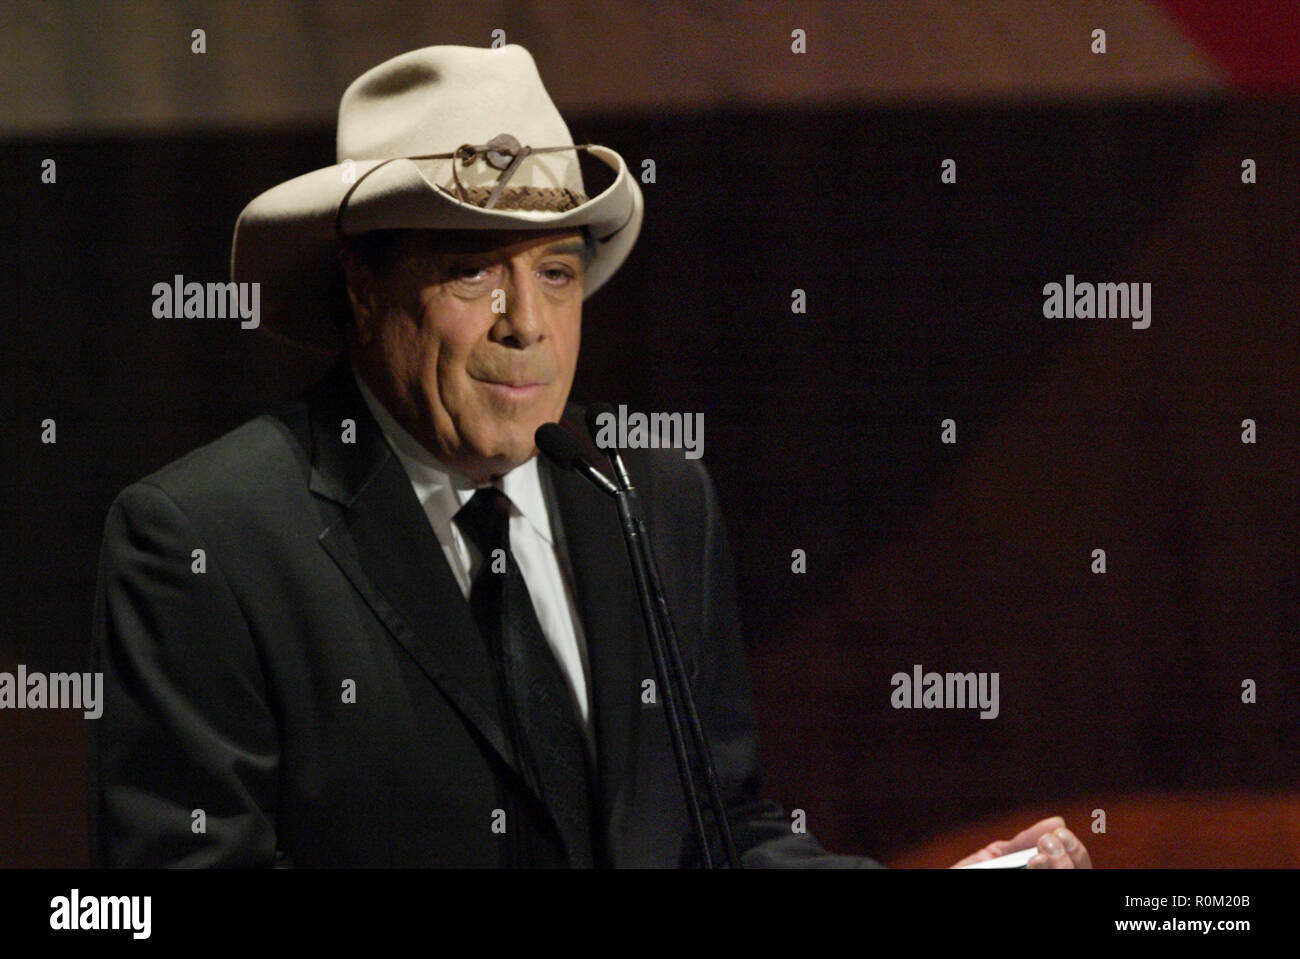 Molly Meldrum presenting at the 2009 Helpmann Awards, held at Sydney Opera House in Sydney, Australia on 27 July 2009. Stock Photo